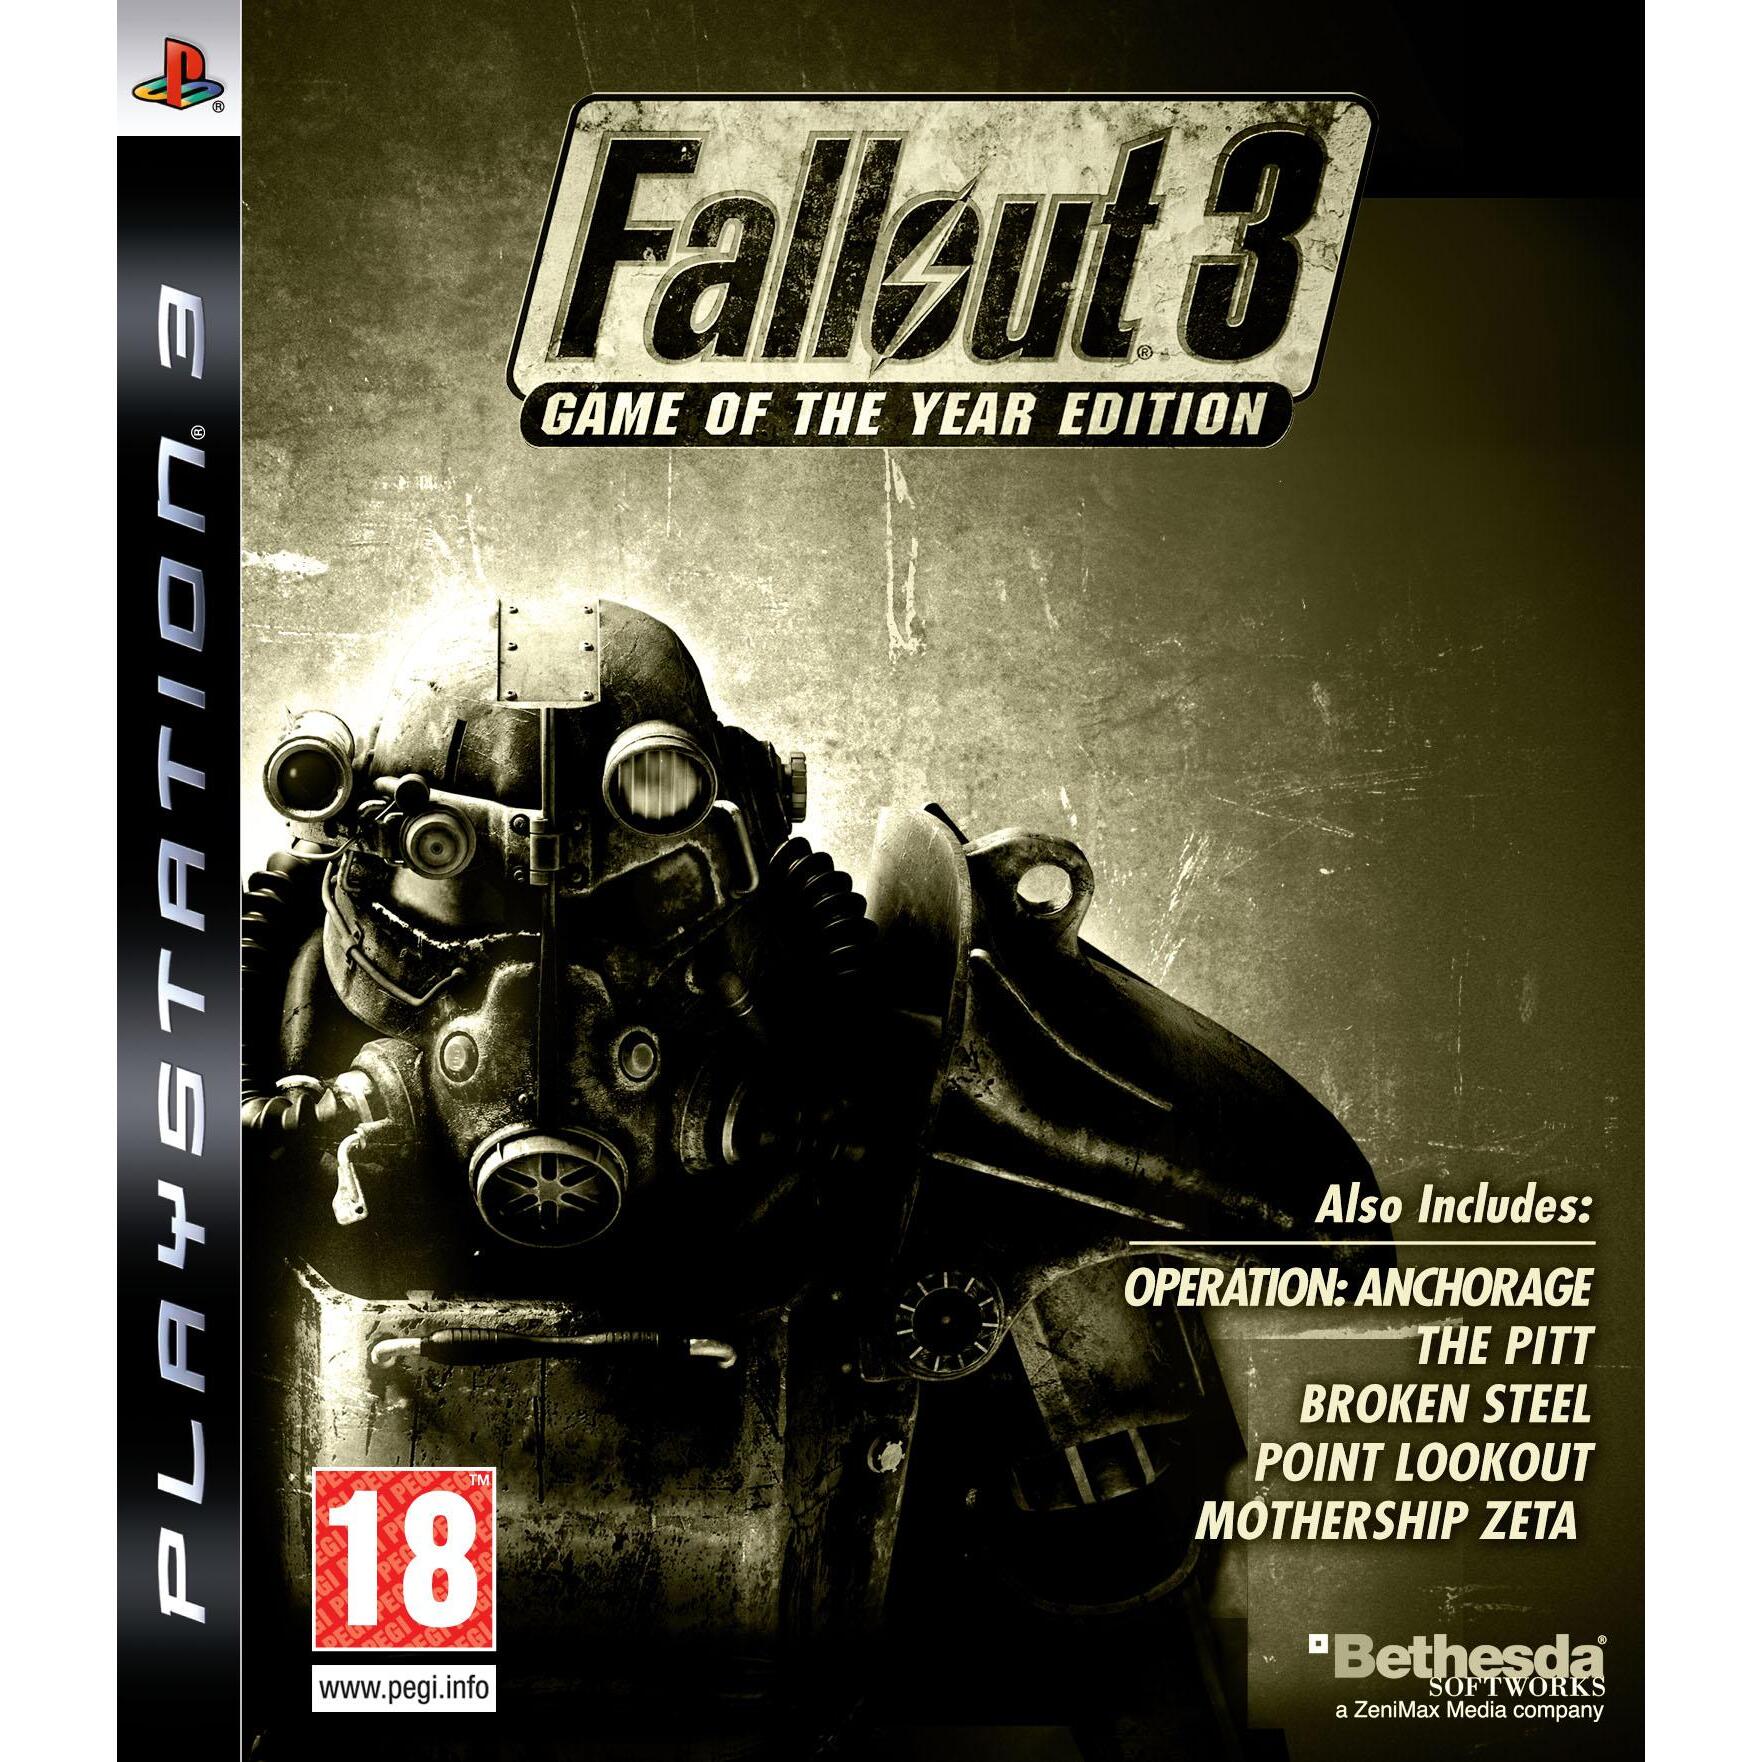 Fallout 3 game of the year edition не запускается в стиме фото 105